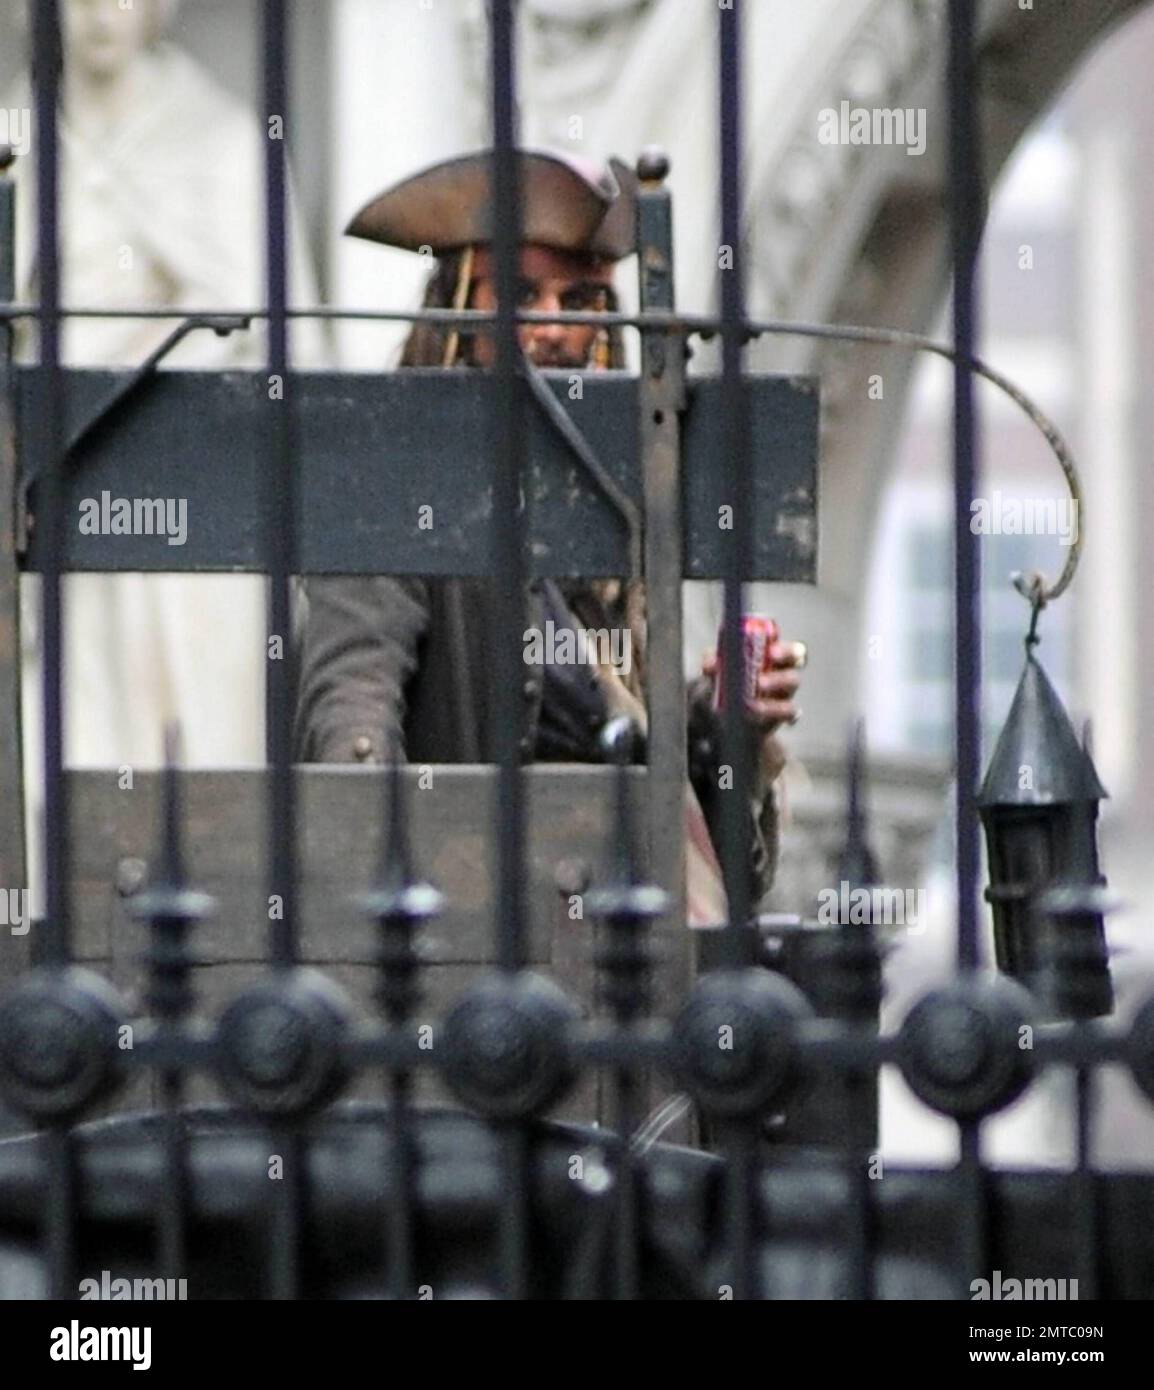 A stunt double dressed as Johnny Depp's character Captain Jack Sparrow sips on a soda and later is filmed driving a burning carriage on the set of 'Pirates of the Caribbean: On Stranger Tides' filming at Greenwich's Old Royal Naval College while excited fans tried to catch a glimpse of the action by climbing a fence. London, UK. 10/09/10.    . Stock Photo